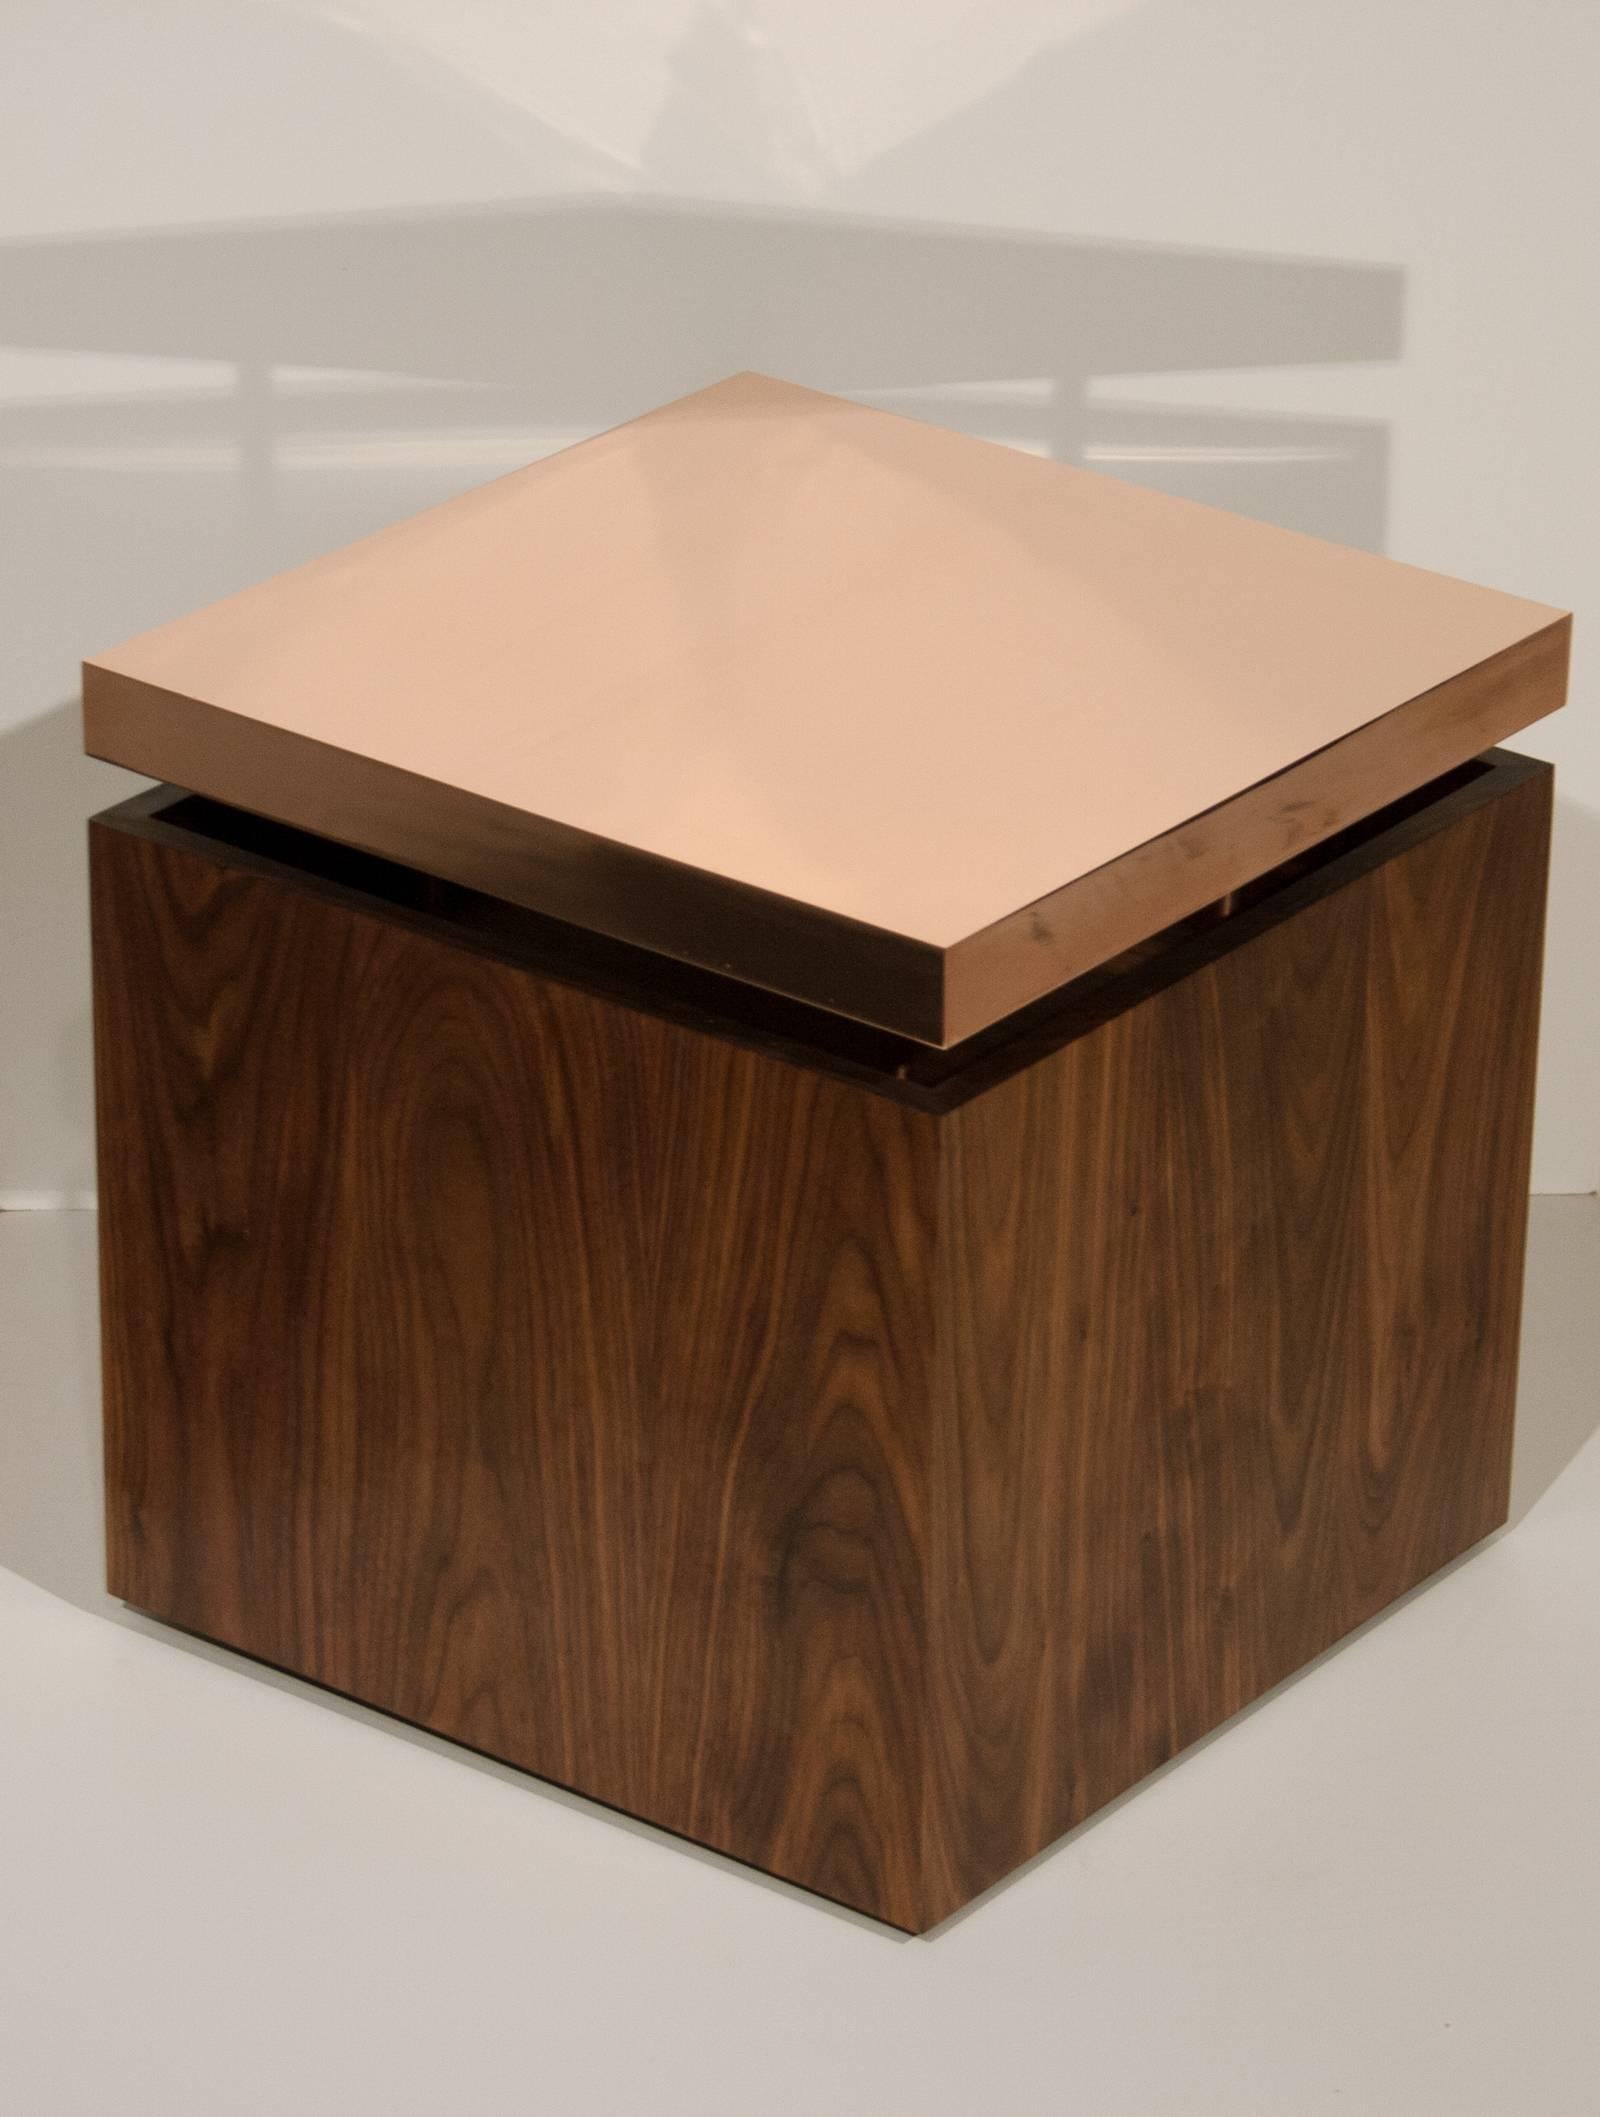 Plated Pair of Contemporary Cube End Tables in Copper and Walnut by Brant Ritter For Sale